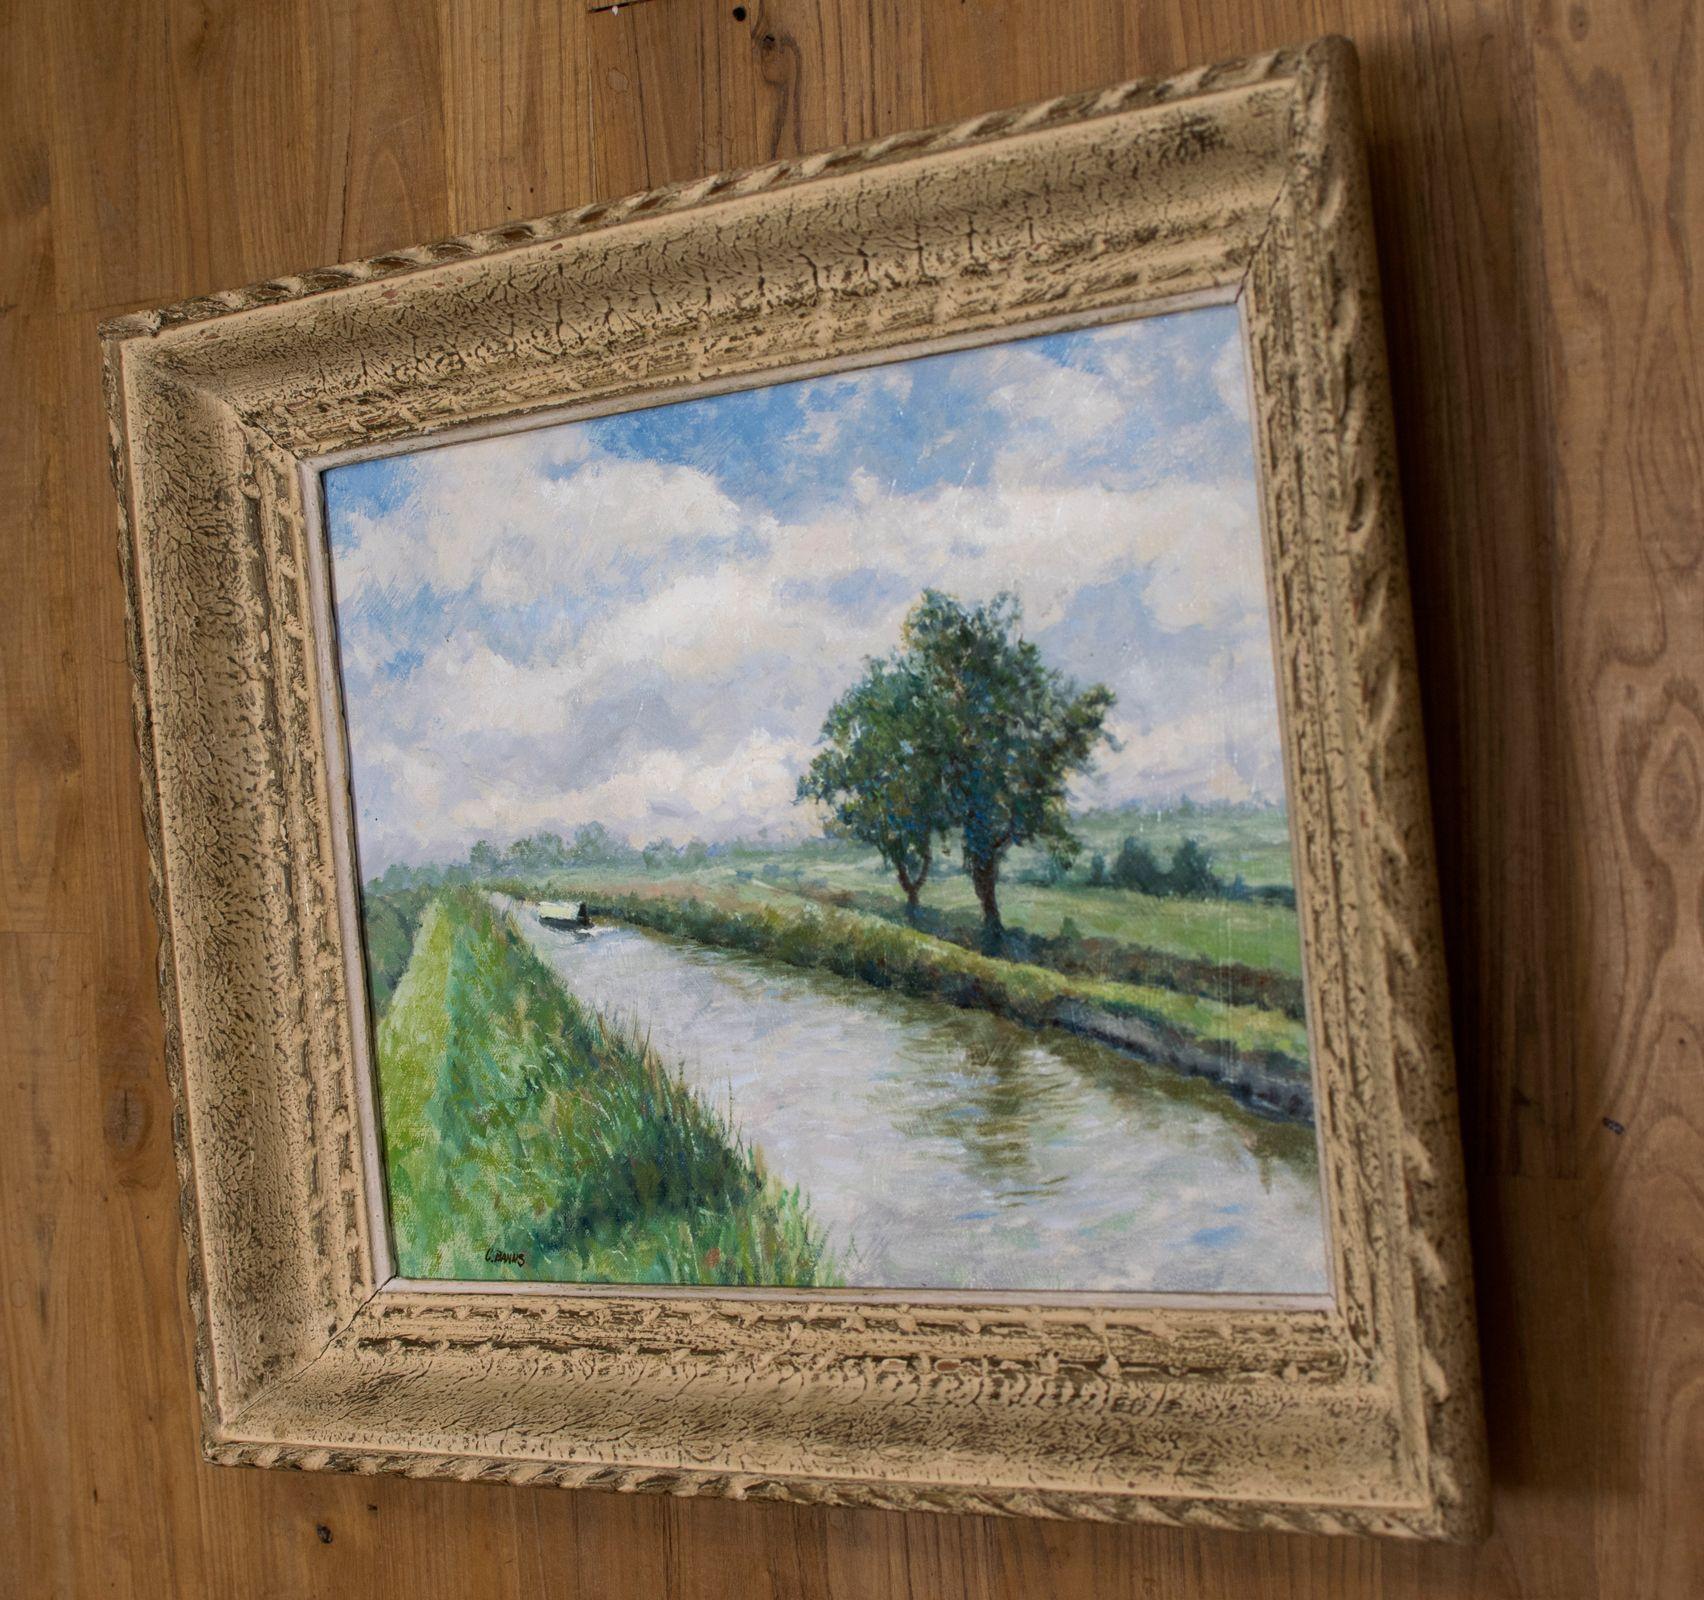 Morning amble o'er the grass strown towpath. Impressionist Canal painting.    An early morning gongoozle by the edge of a canal, a memory from a former life. An original oil painting in the style of impressionism on stretched linen canvas. It comes